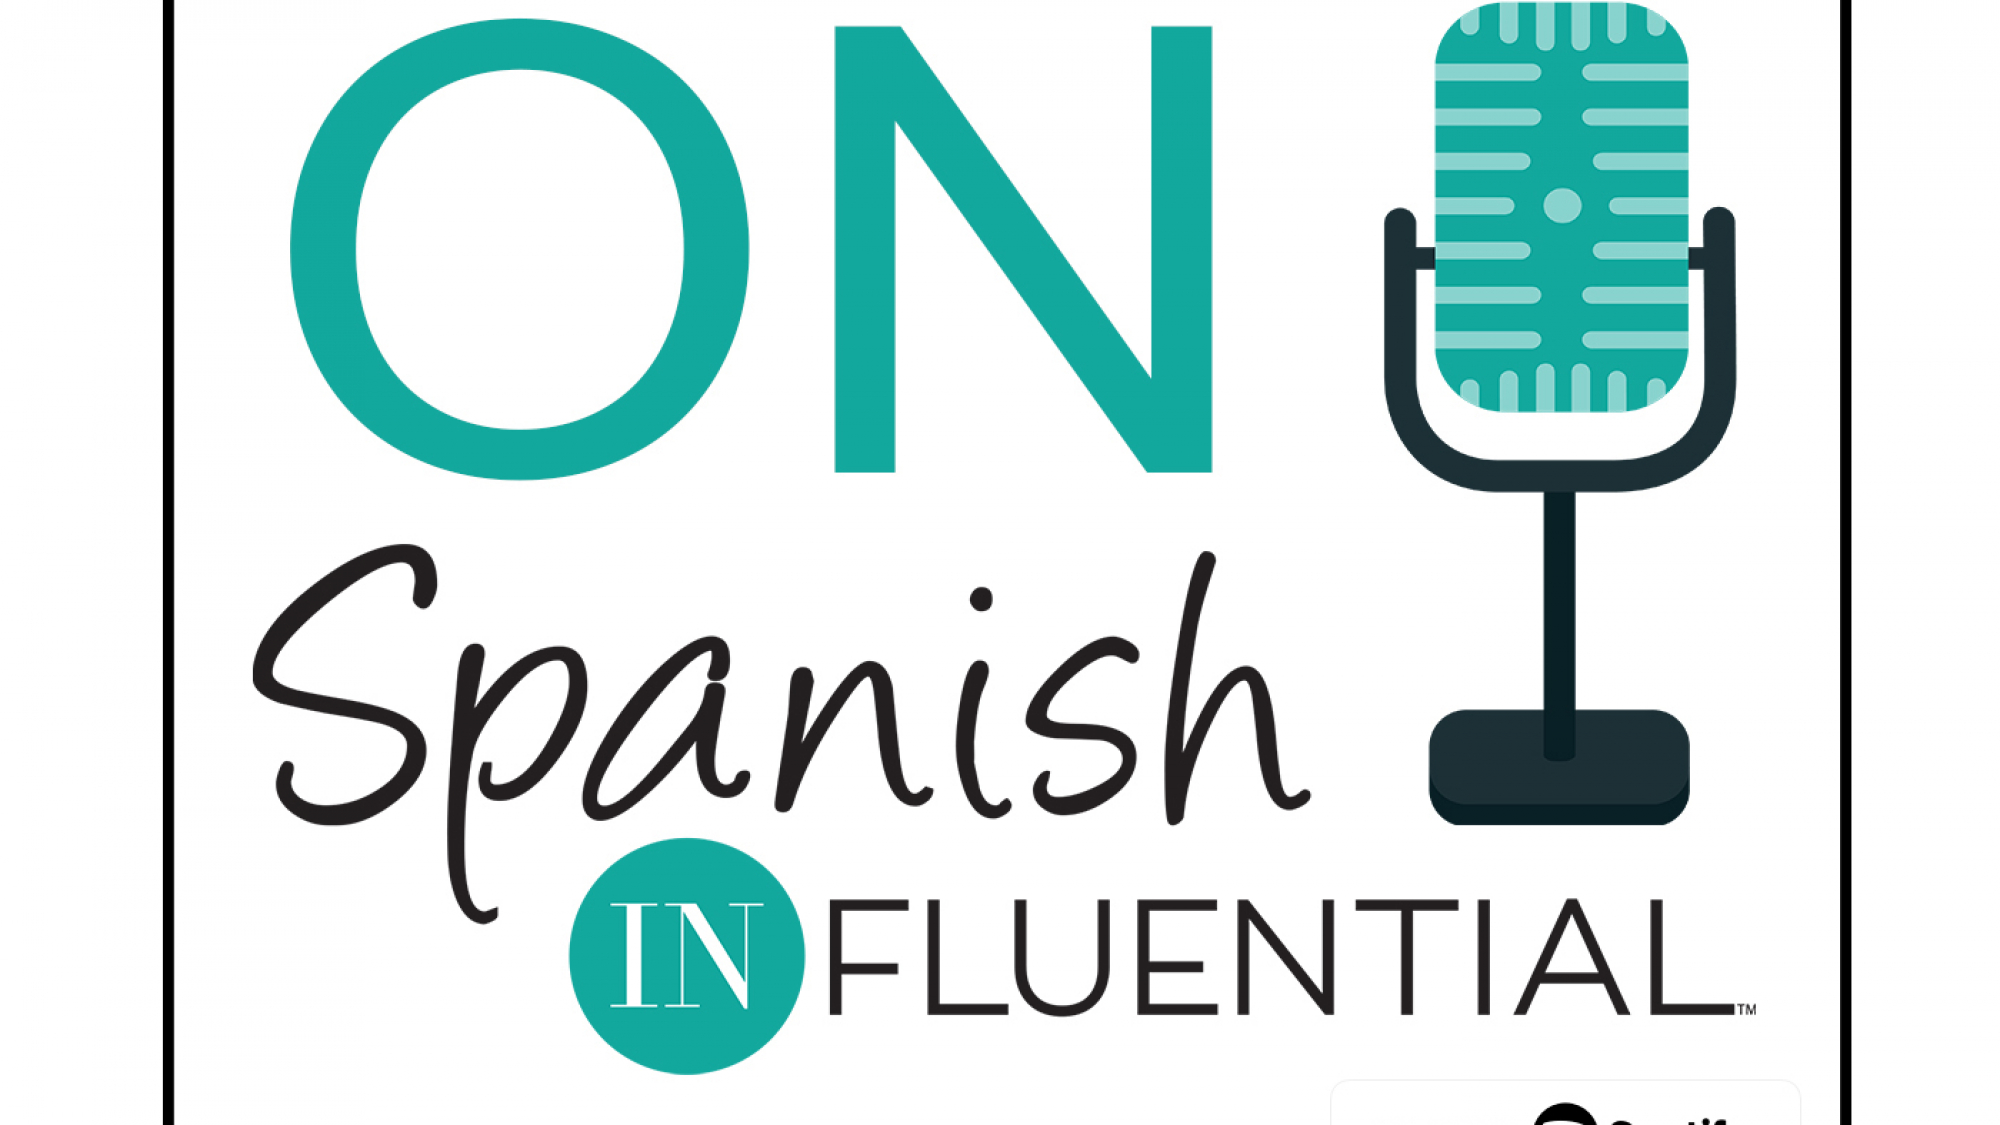 ON SPANISH INFLUENTIAL THE PODCAST BY ALF-CHOICE